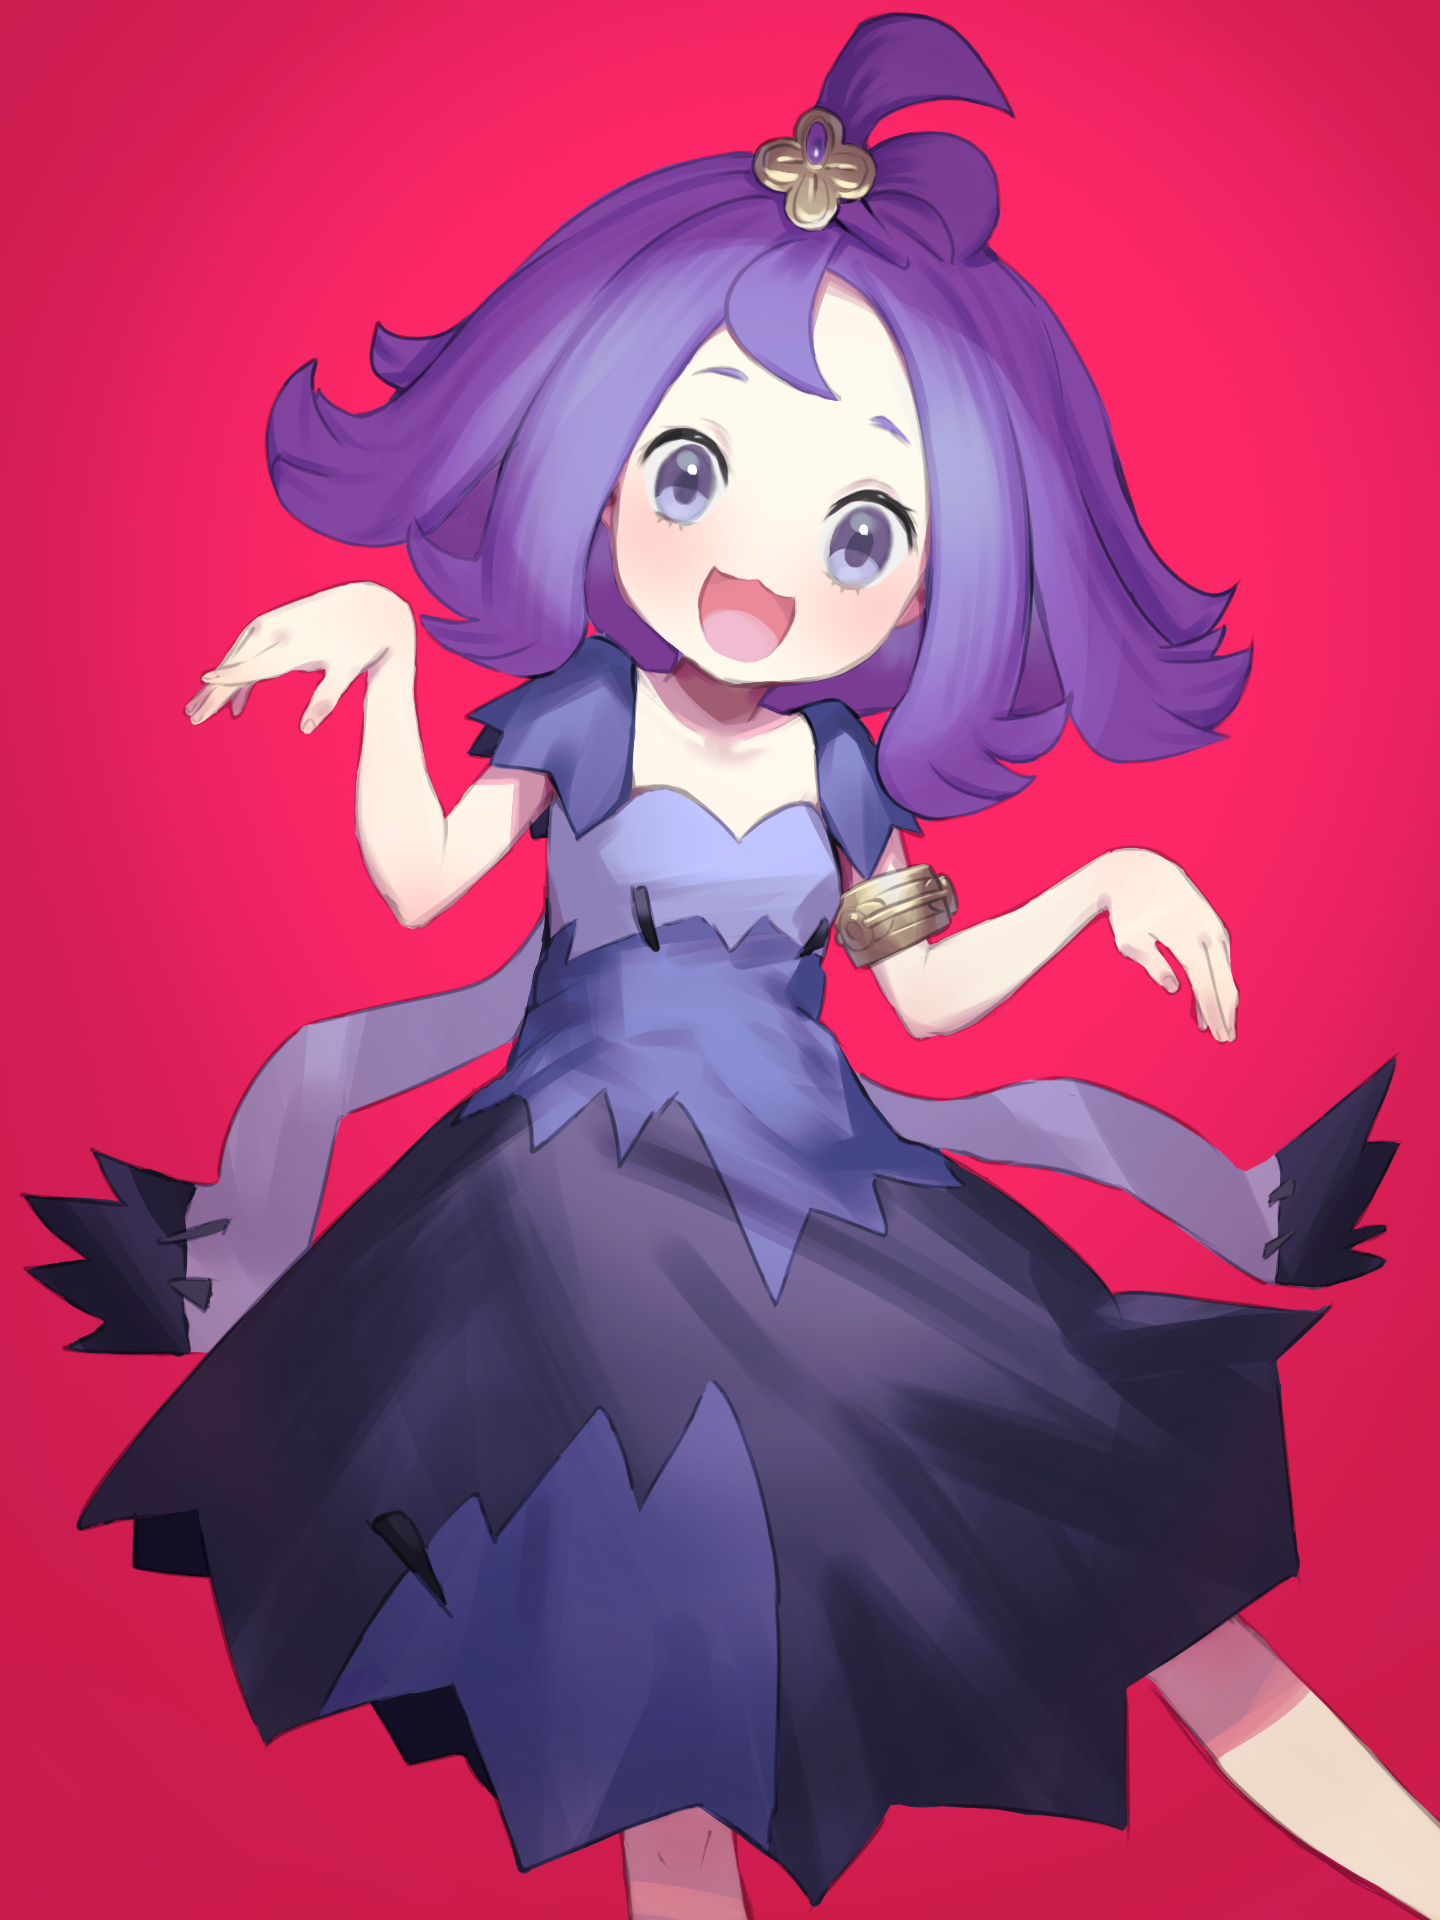 1612037941610.png. acerola_pokemon_and_3_more_drawn_by_ie_raarami 0cb9f1d65...